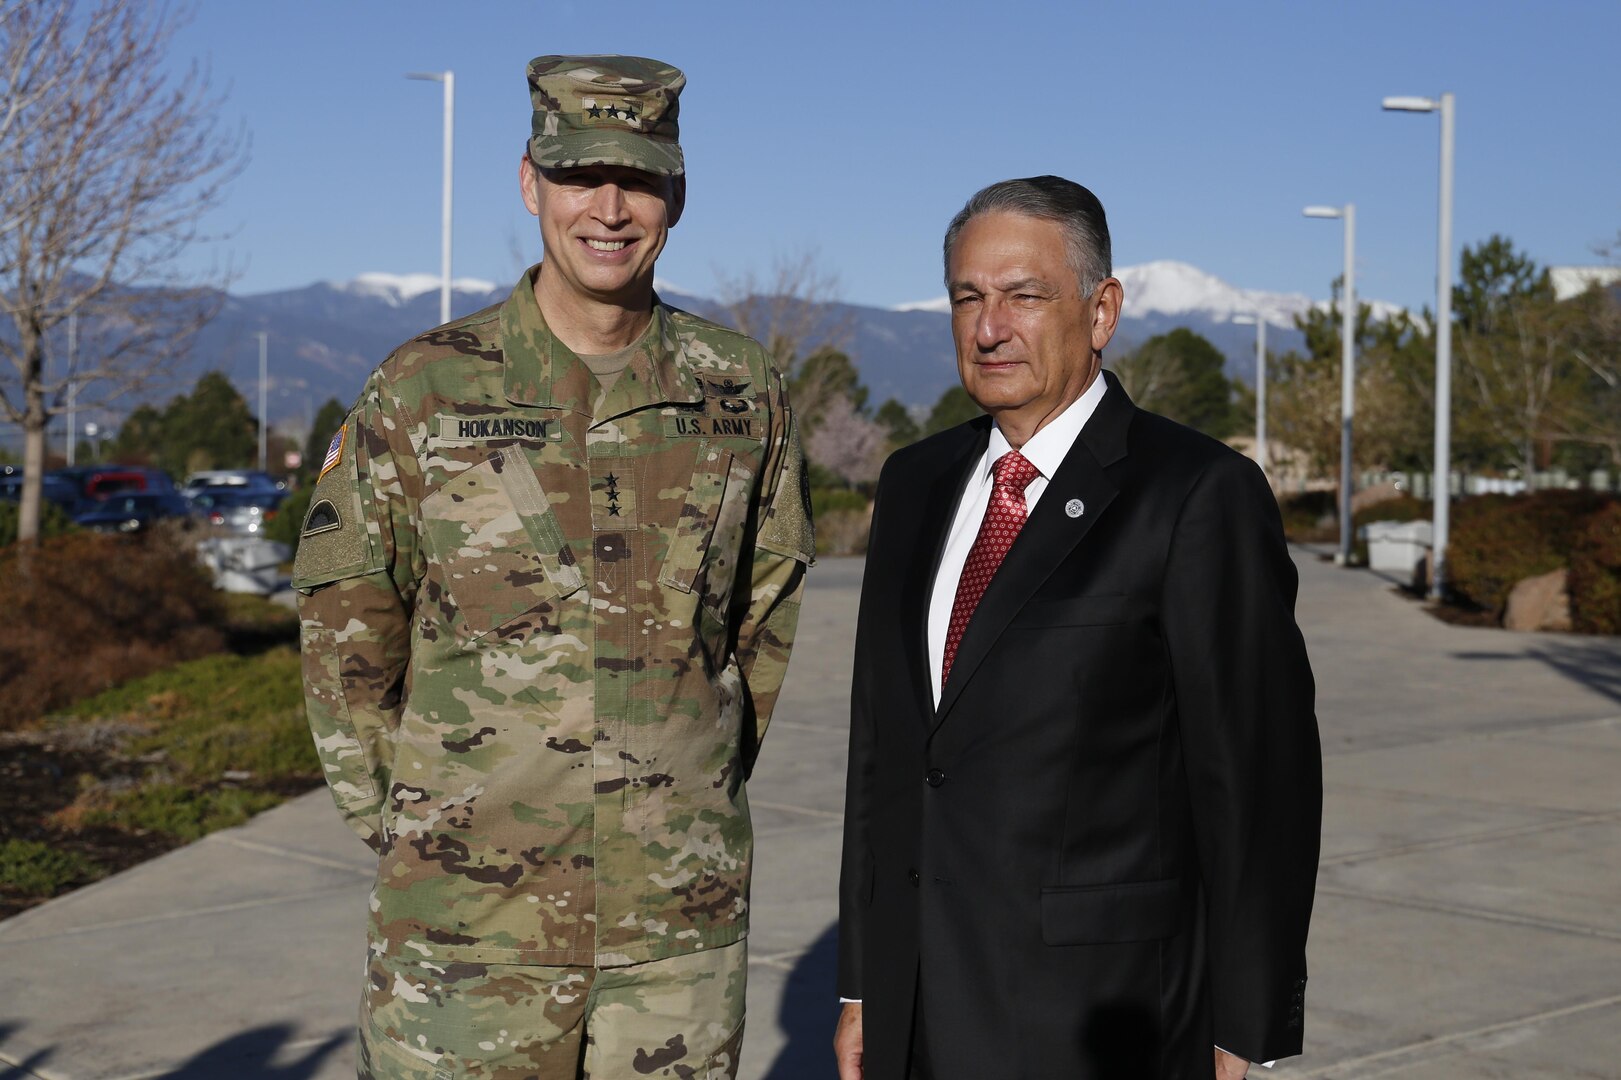 LTG Daniel R. Hokanson (left), USNORTHCOM Deputy Commander, welcomed Mr. Luis Felipe Puente (right), Mexico's National Coordinator for Civil Protection, to NORAD and USNORTHCOM April 13, 2016, to exchange information on disaster response and preparation. 
